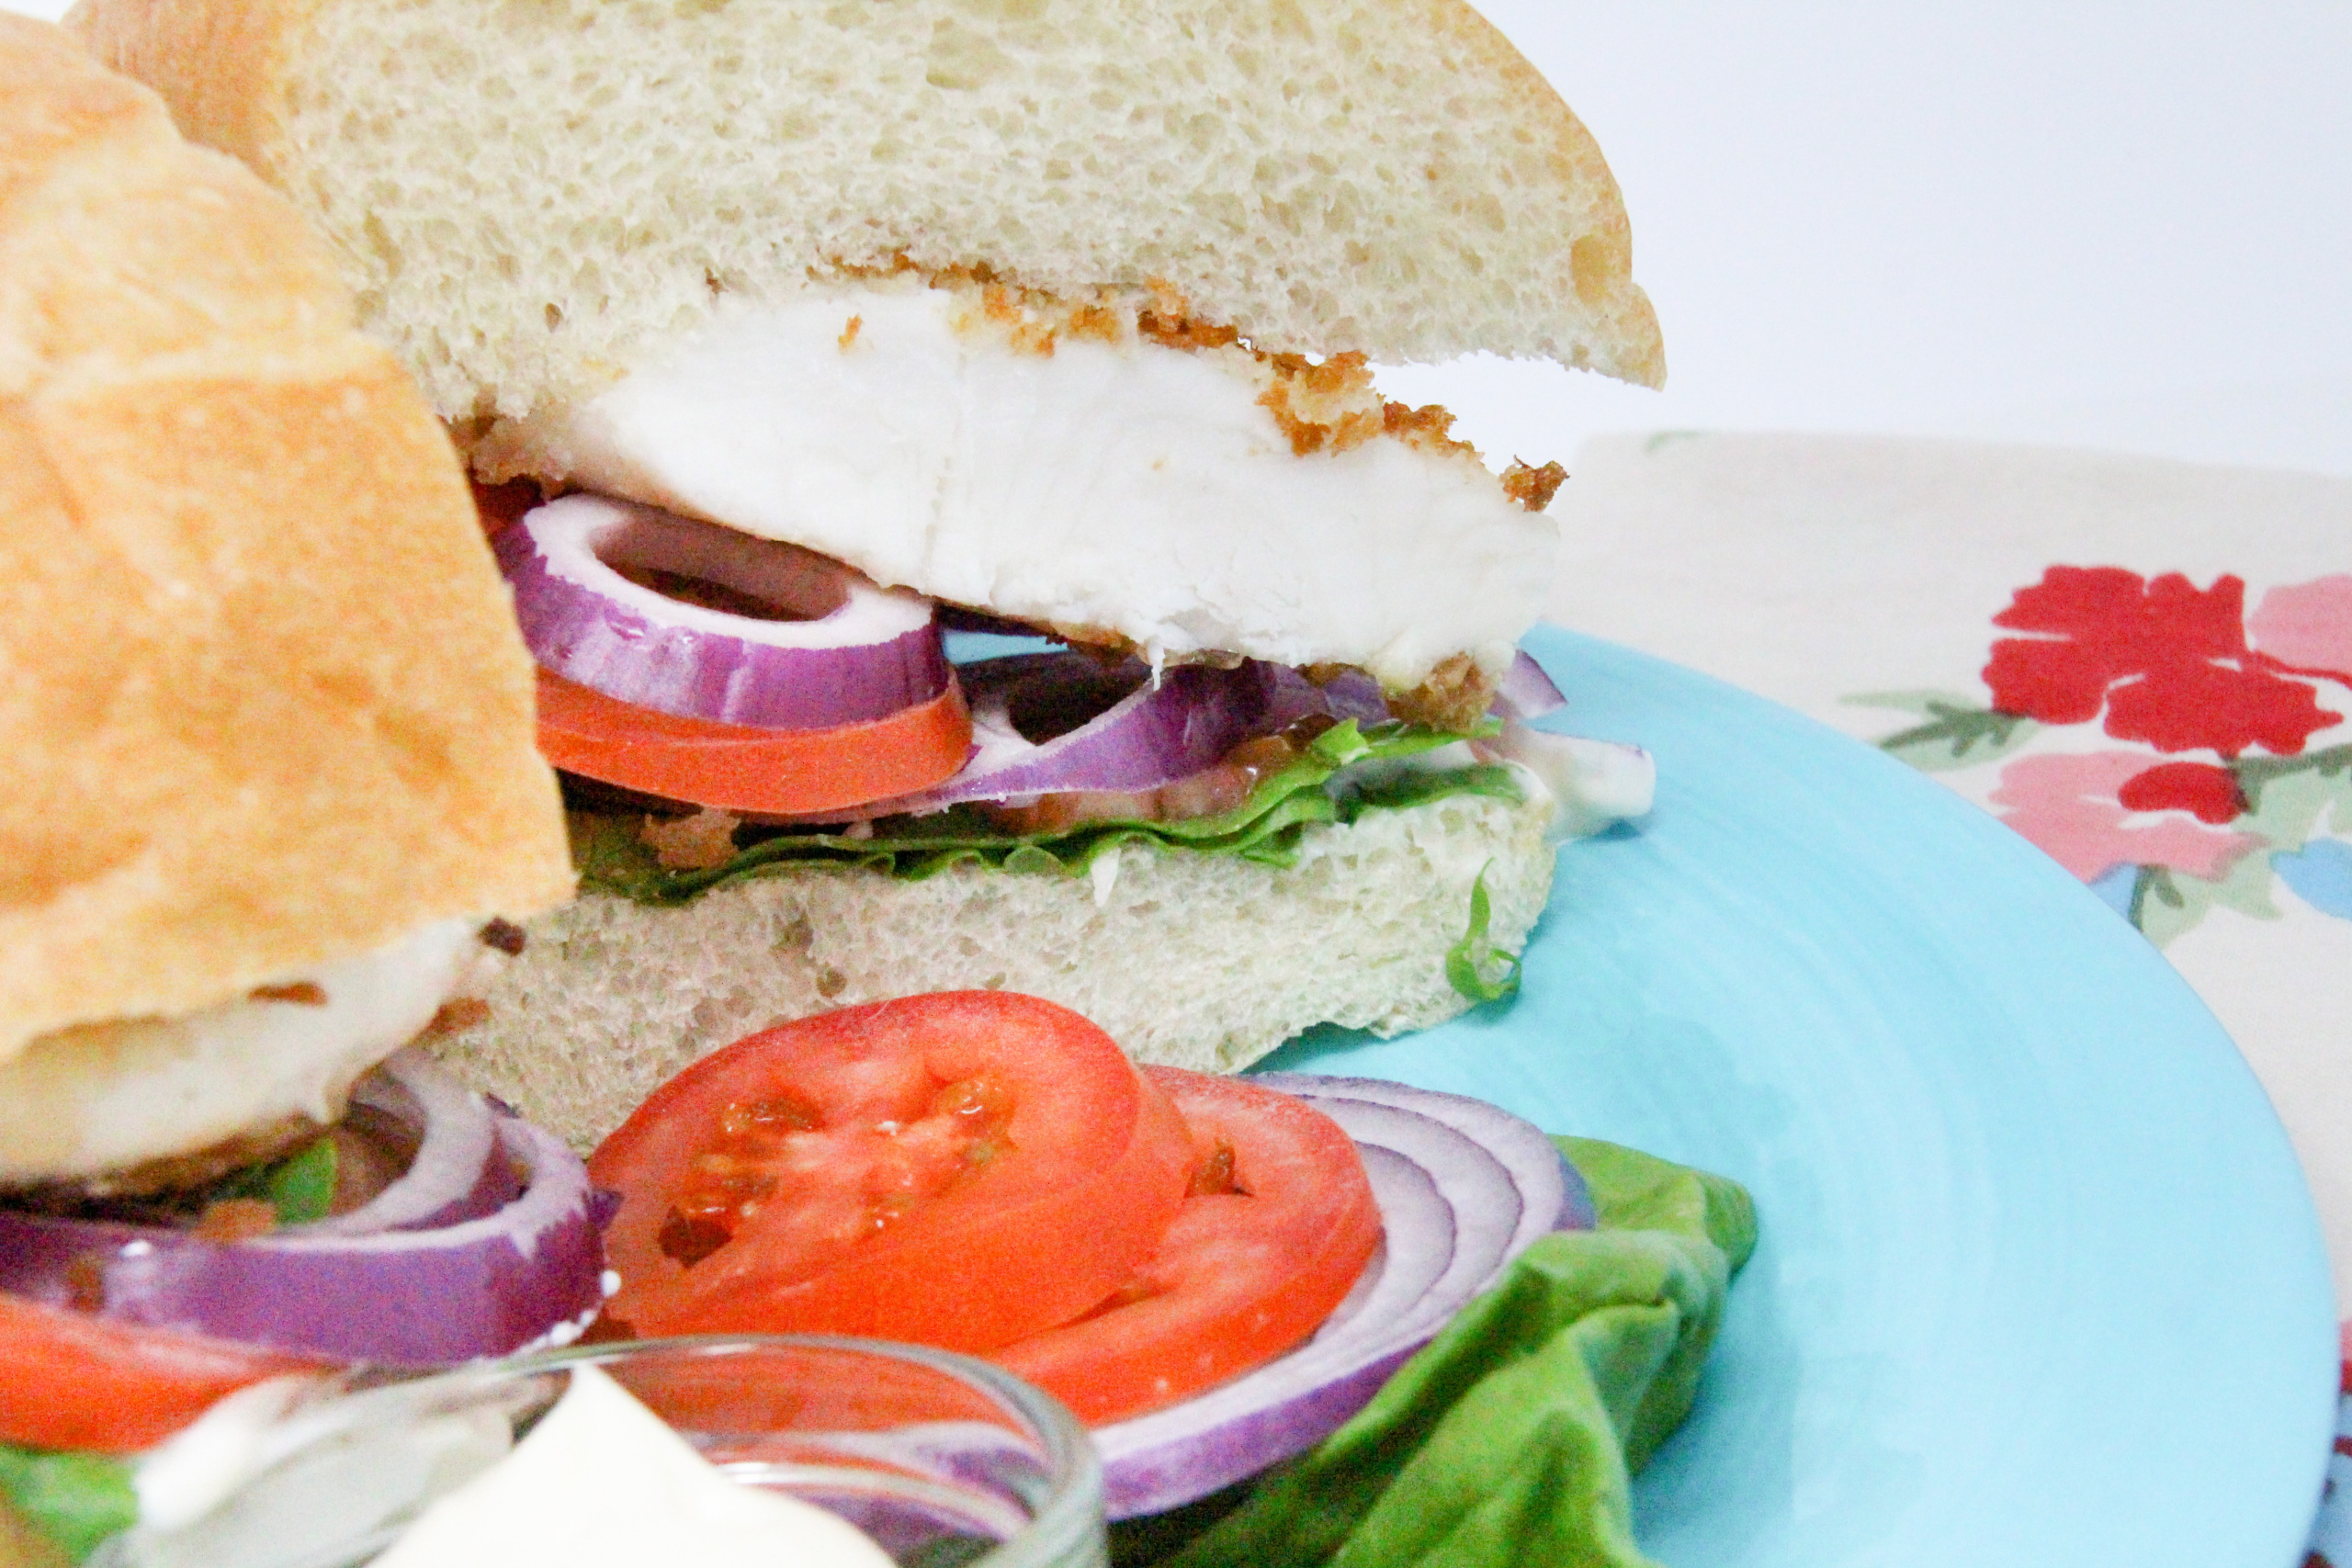 Fischbrötchen (German Fish Sandwich) uses a thin, pan-fried fillet, coated with breadcrumbs for a crispy exterior, and is layered with lettuce, red onions, peppers, and tomatoes for a delicious and hearty sandwich. Recipe shared with permission granted by T.C. LoTempio, author of MURDER FAUX PAWS.